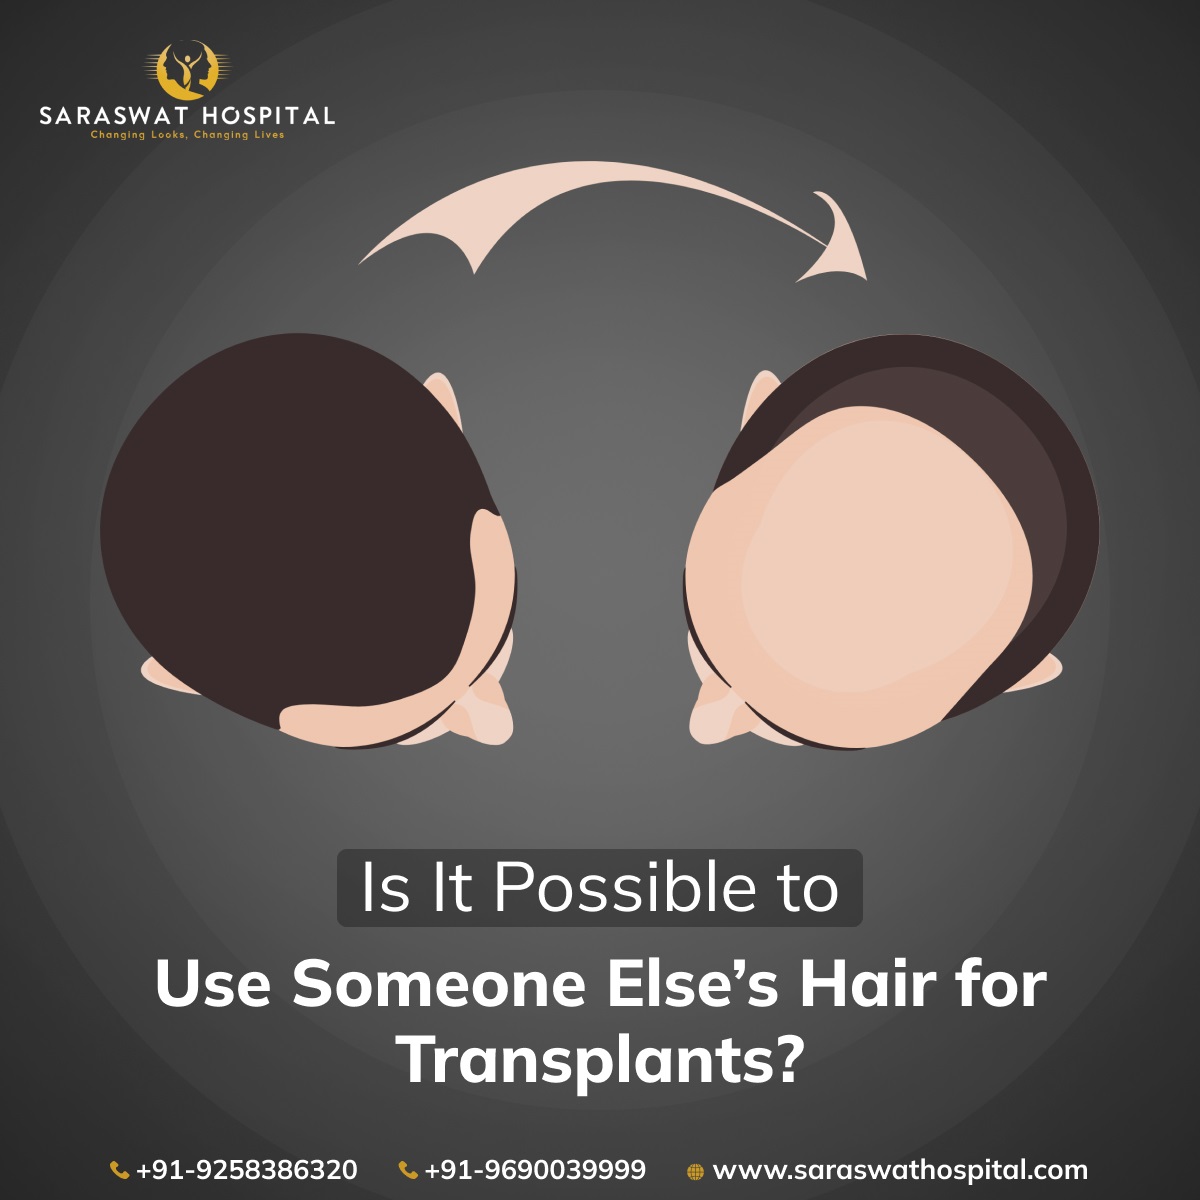 Is it possible to use someone else's hair for transplant